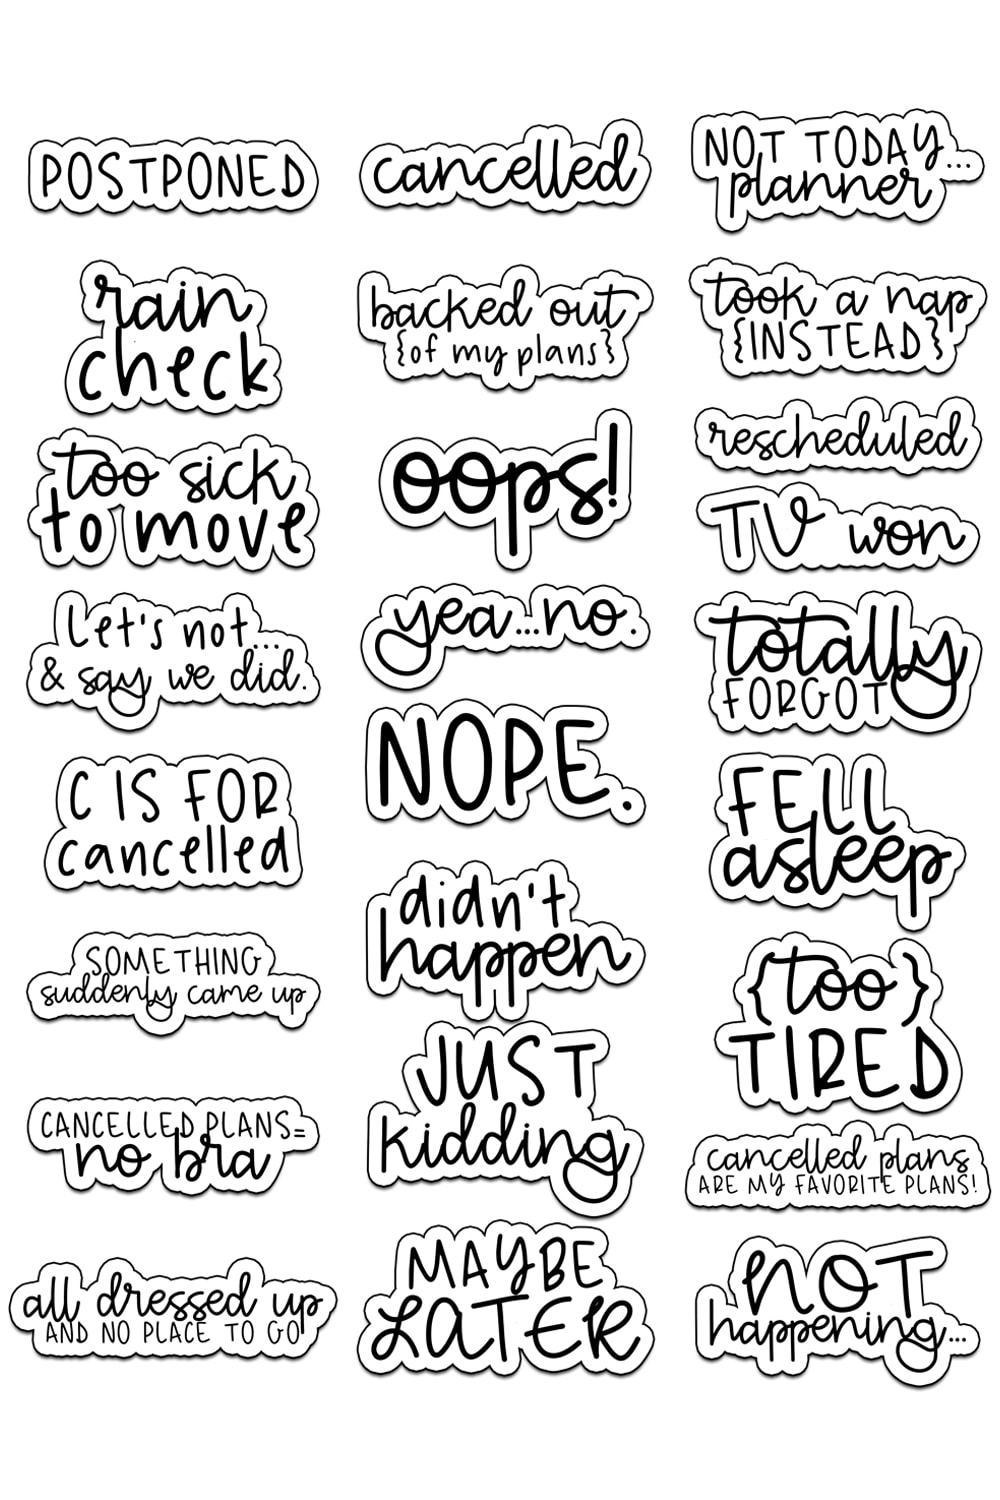 Cancelled Stickers. Download this free set of cancelled stickers perfect for cancelled plans in your planner. Available in standard size, mini and also with the spellings of Cancelled and Canceled. #plannerfreebies #planneraddict